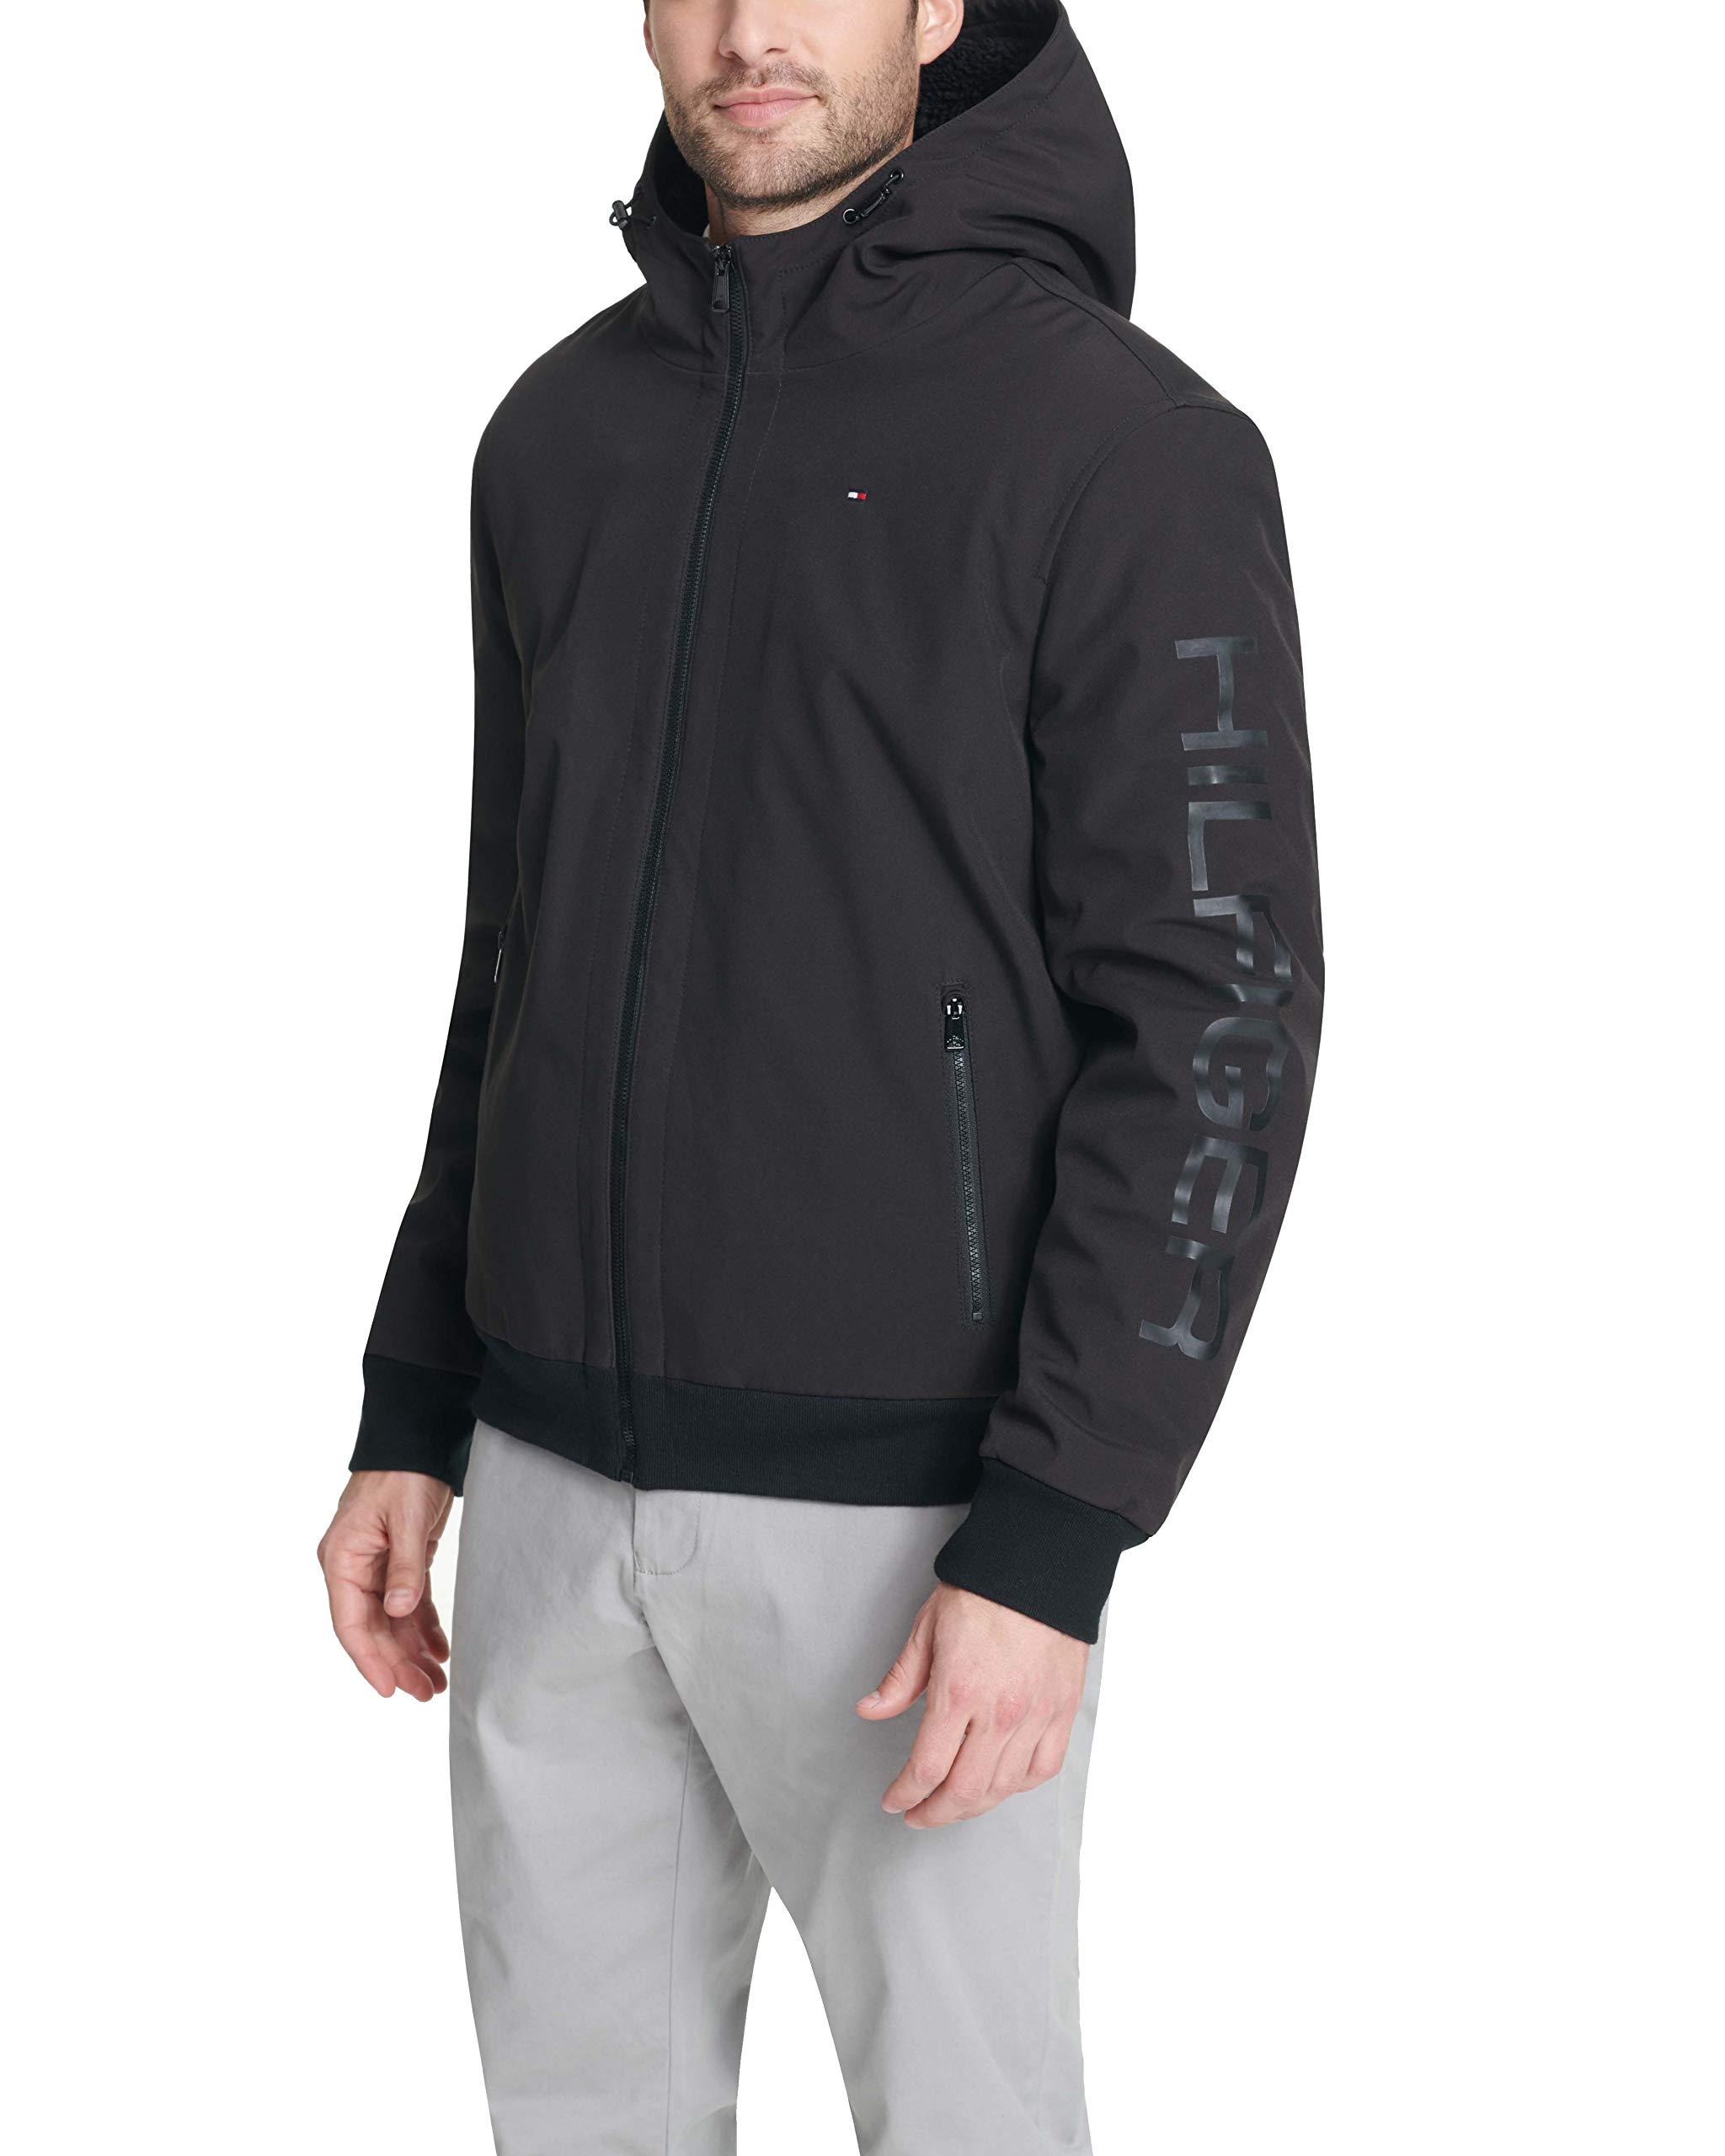 Tommy Hilfiger Softshell Hoody Bomber Jacket With Sherpa Lining in Black  for Men - Lyst